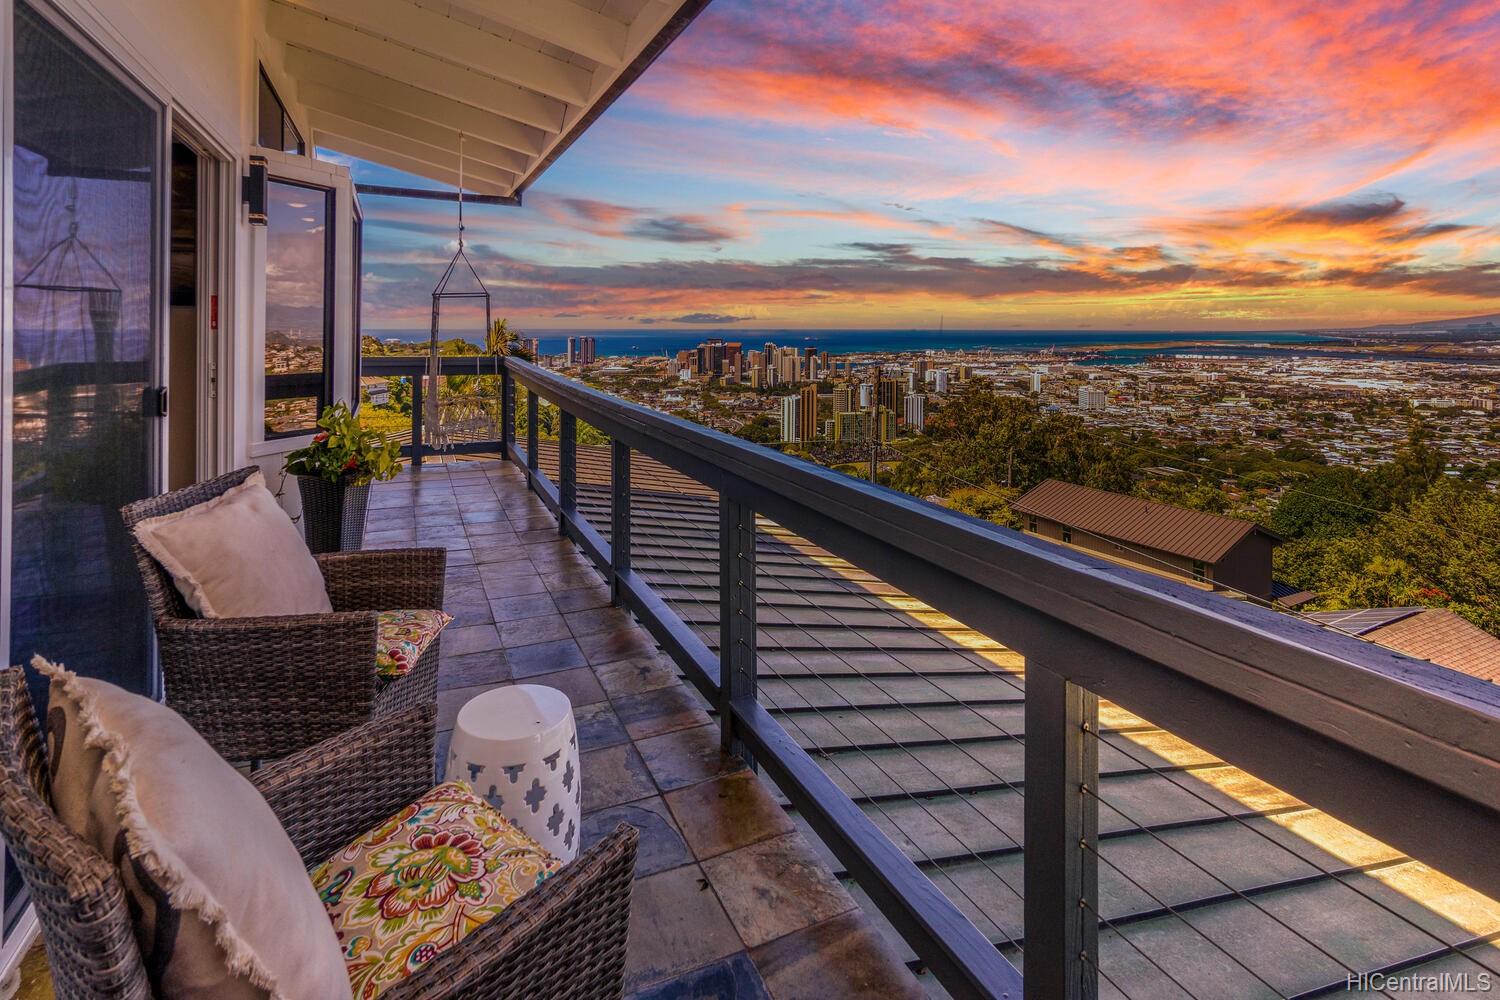 Witness spectacular sunsets from every level.